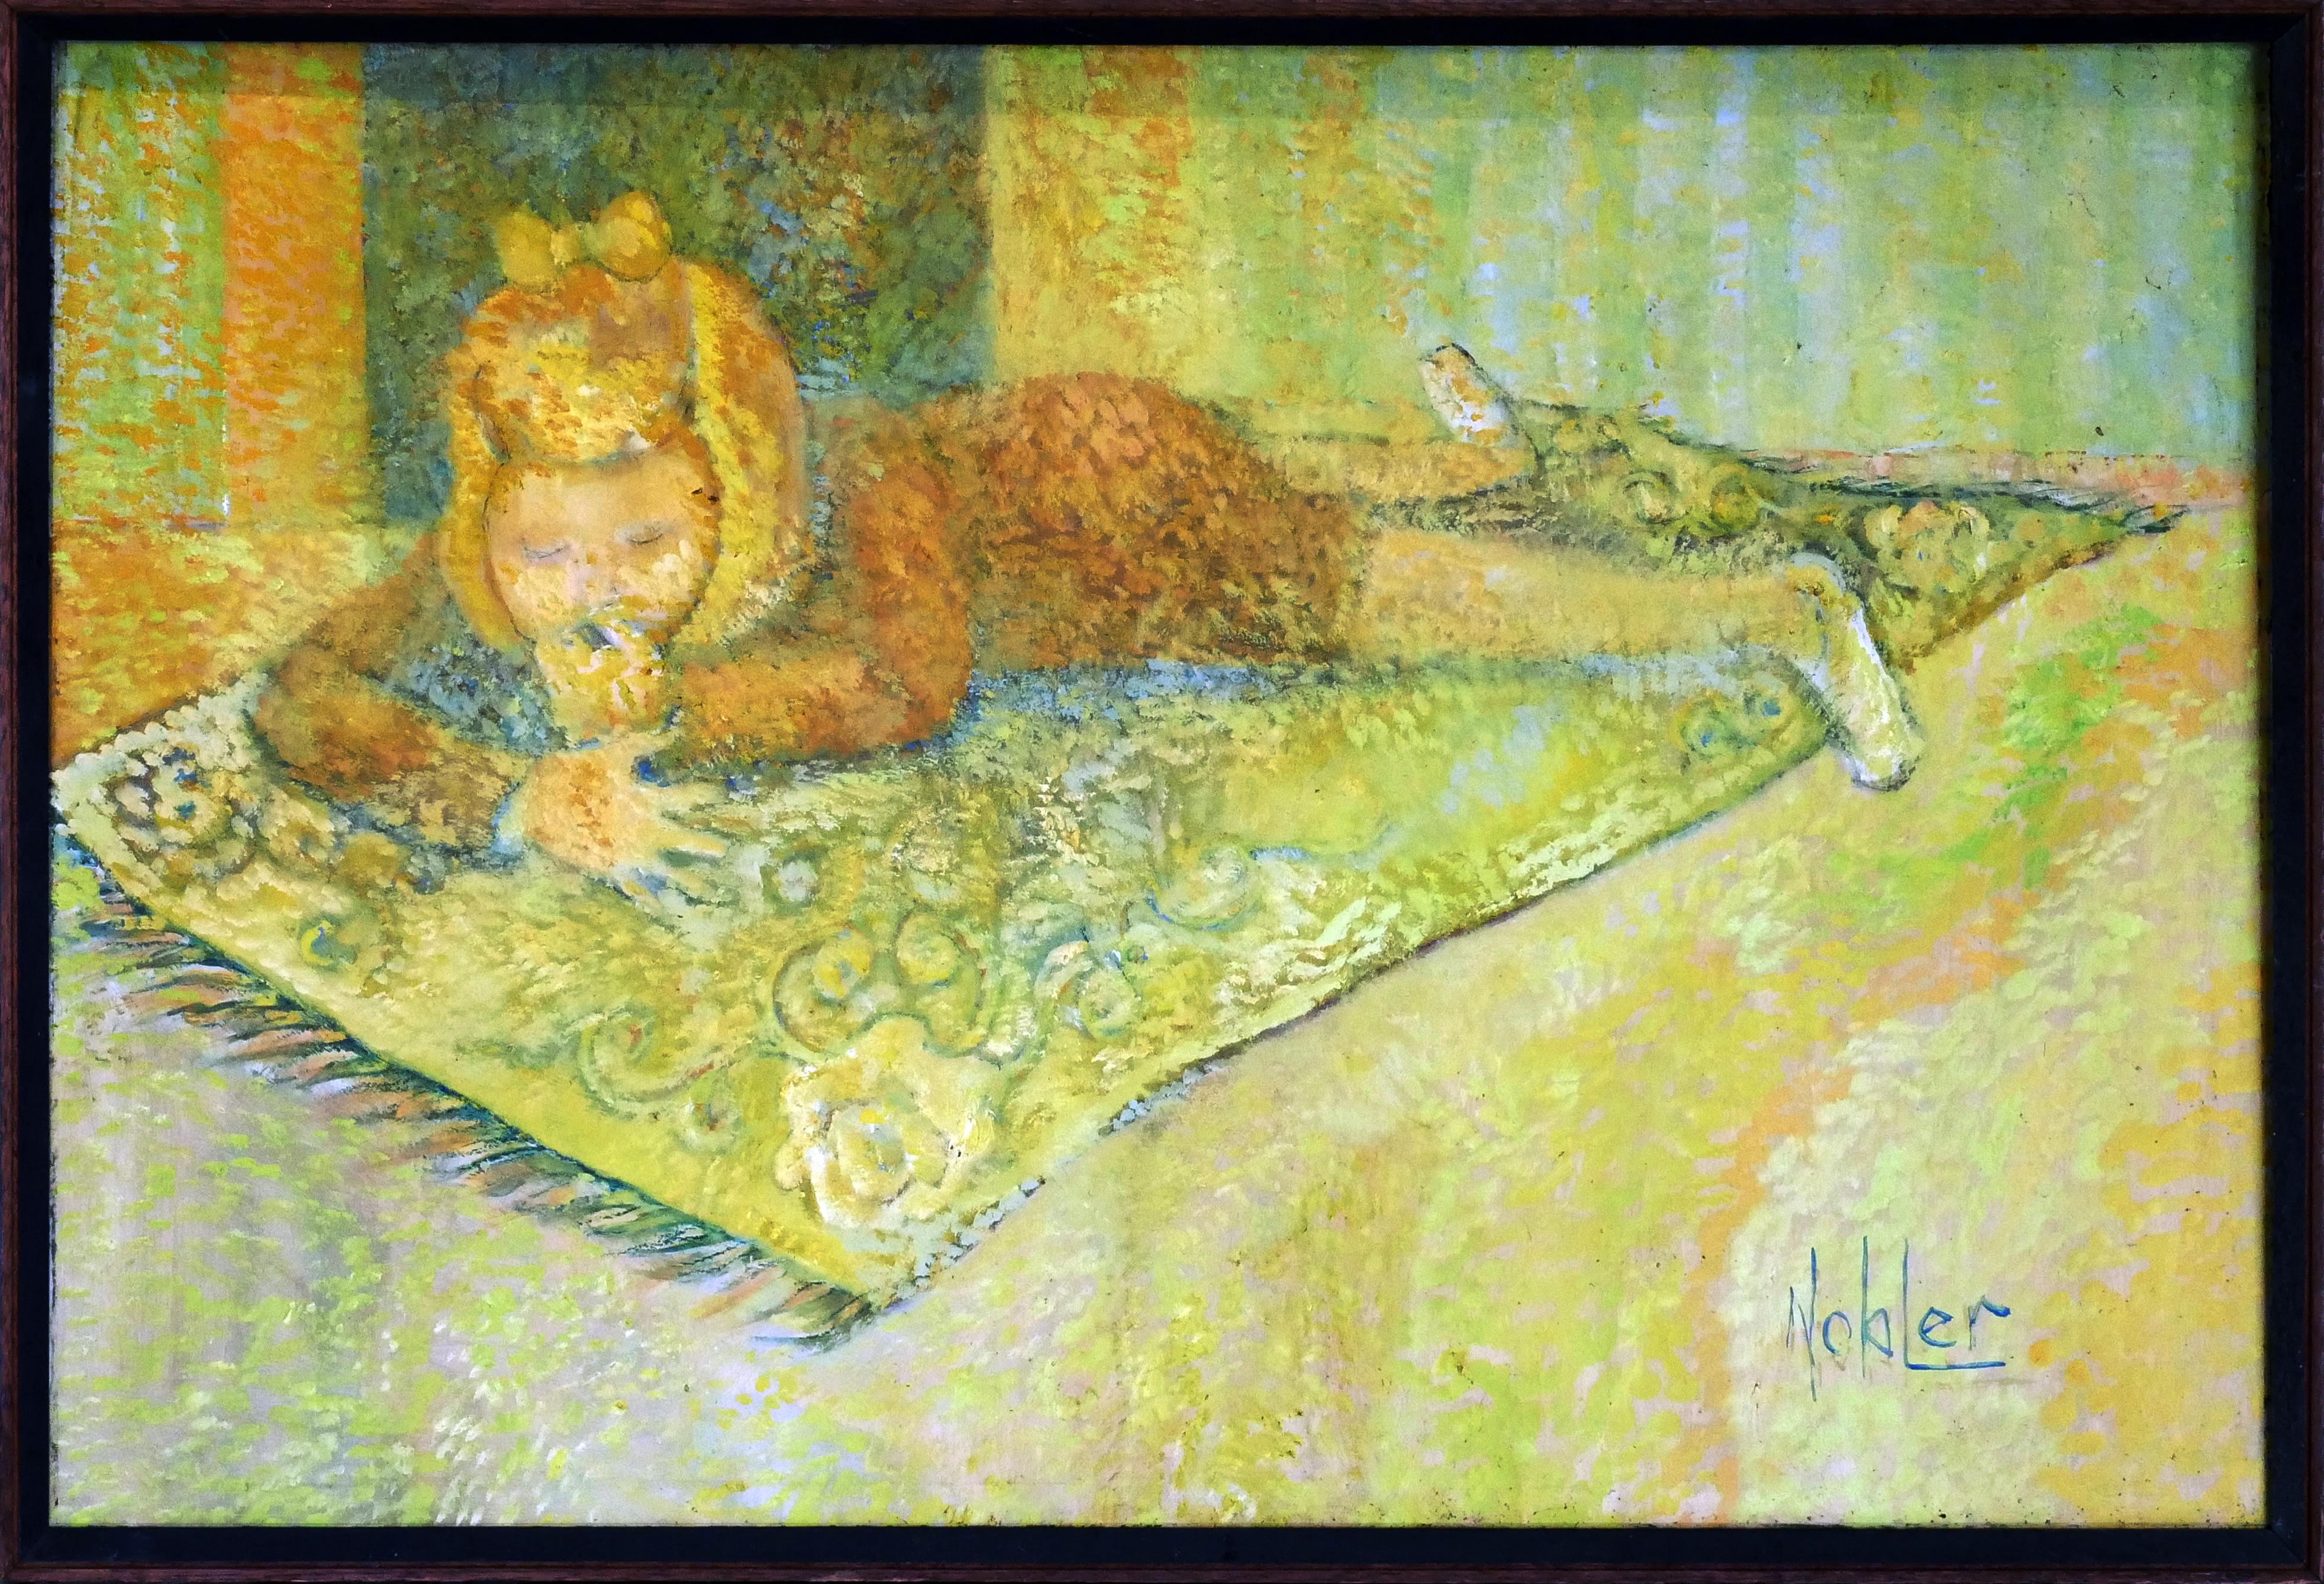 Margaret Nobler Figurative Painting - Modern Yellow Toned Figurative Abstract Painting of a Young Girl Laying on a Rug